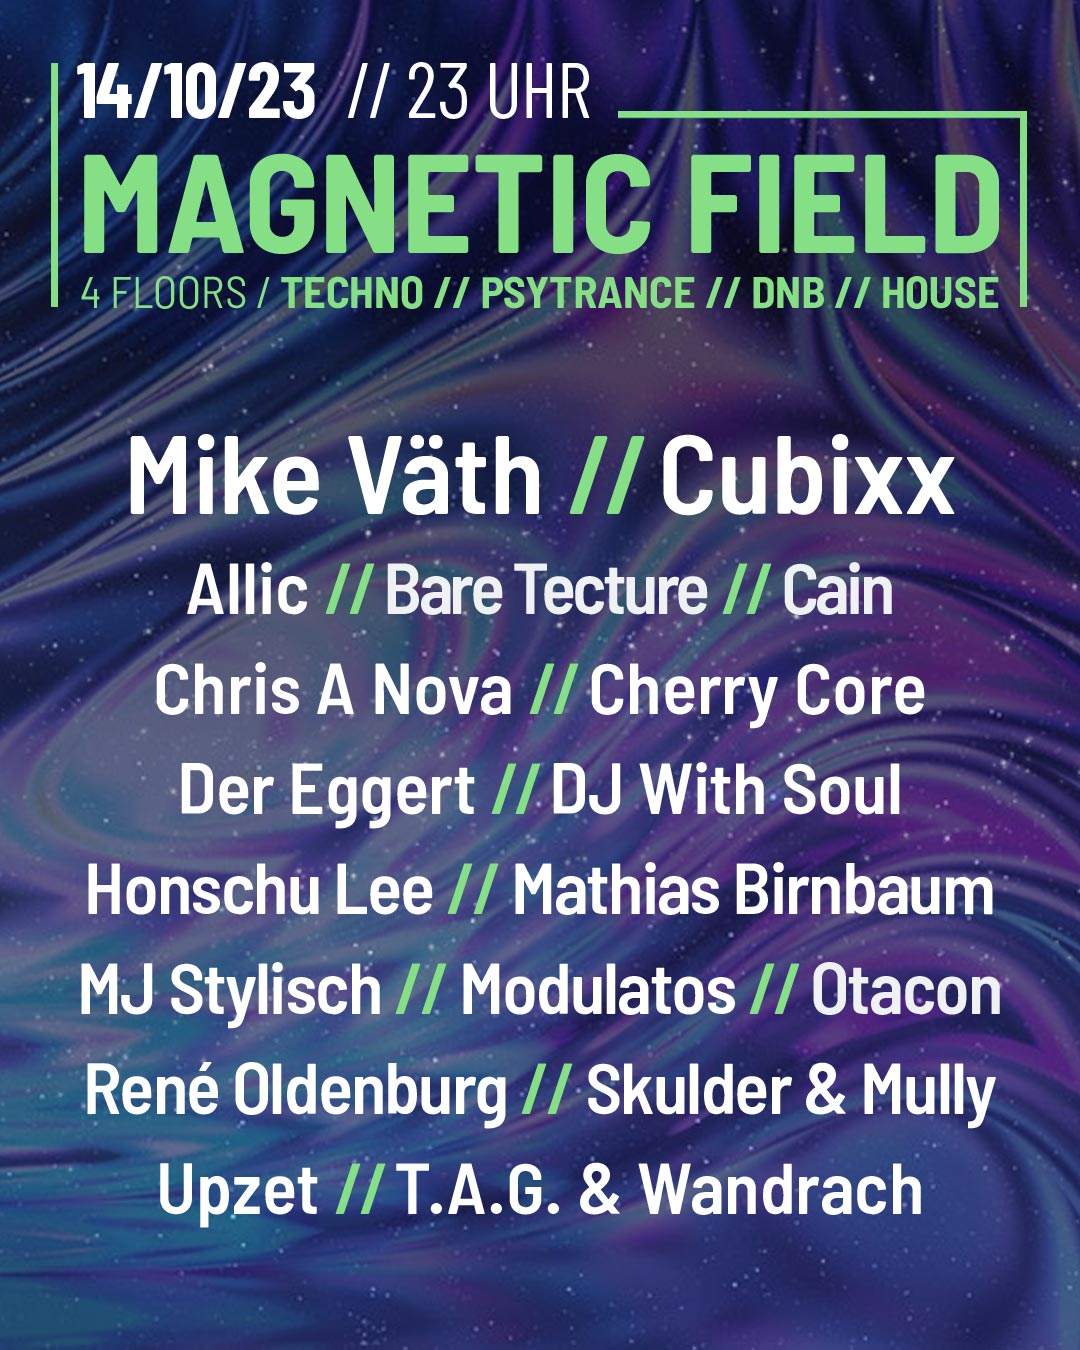 Magnetic Field 8th Anniversary on 4 floors (Psytrance, Techno, DNB, House) - フライヤー裏